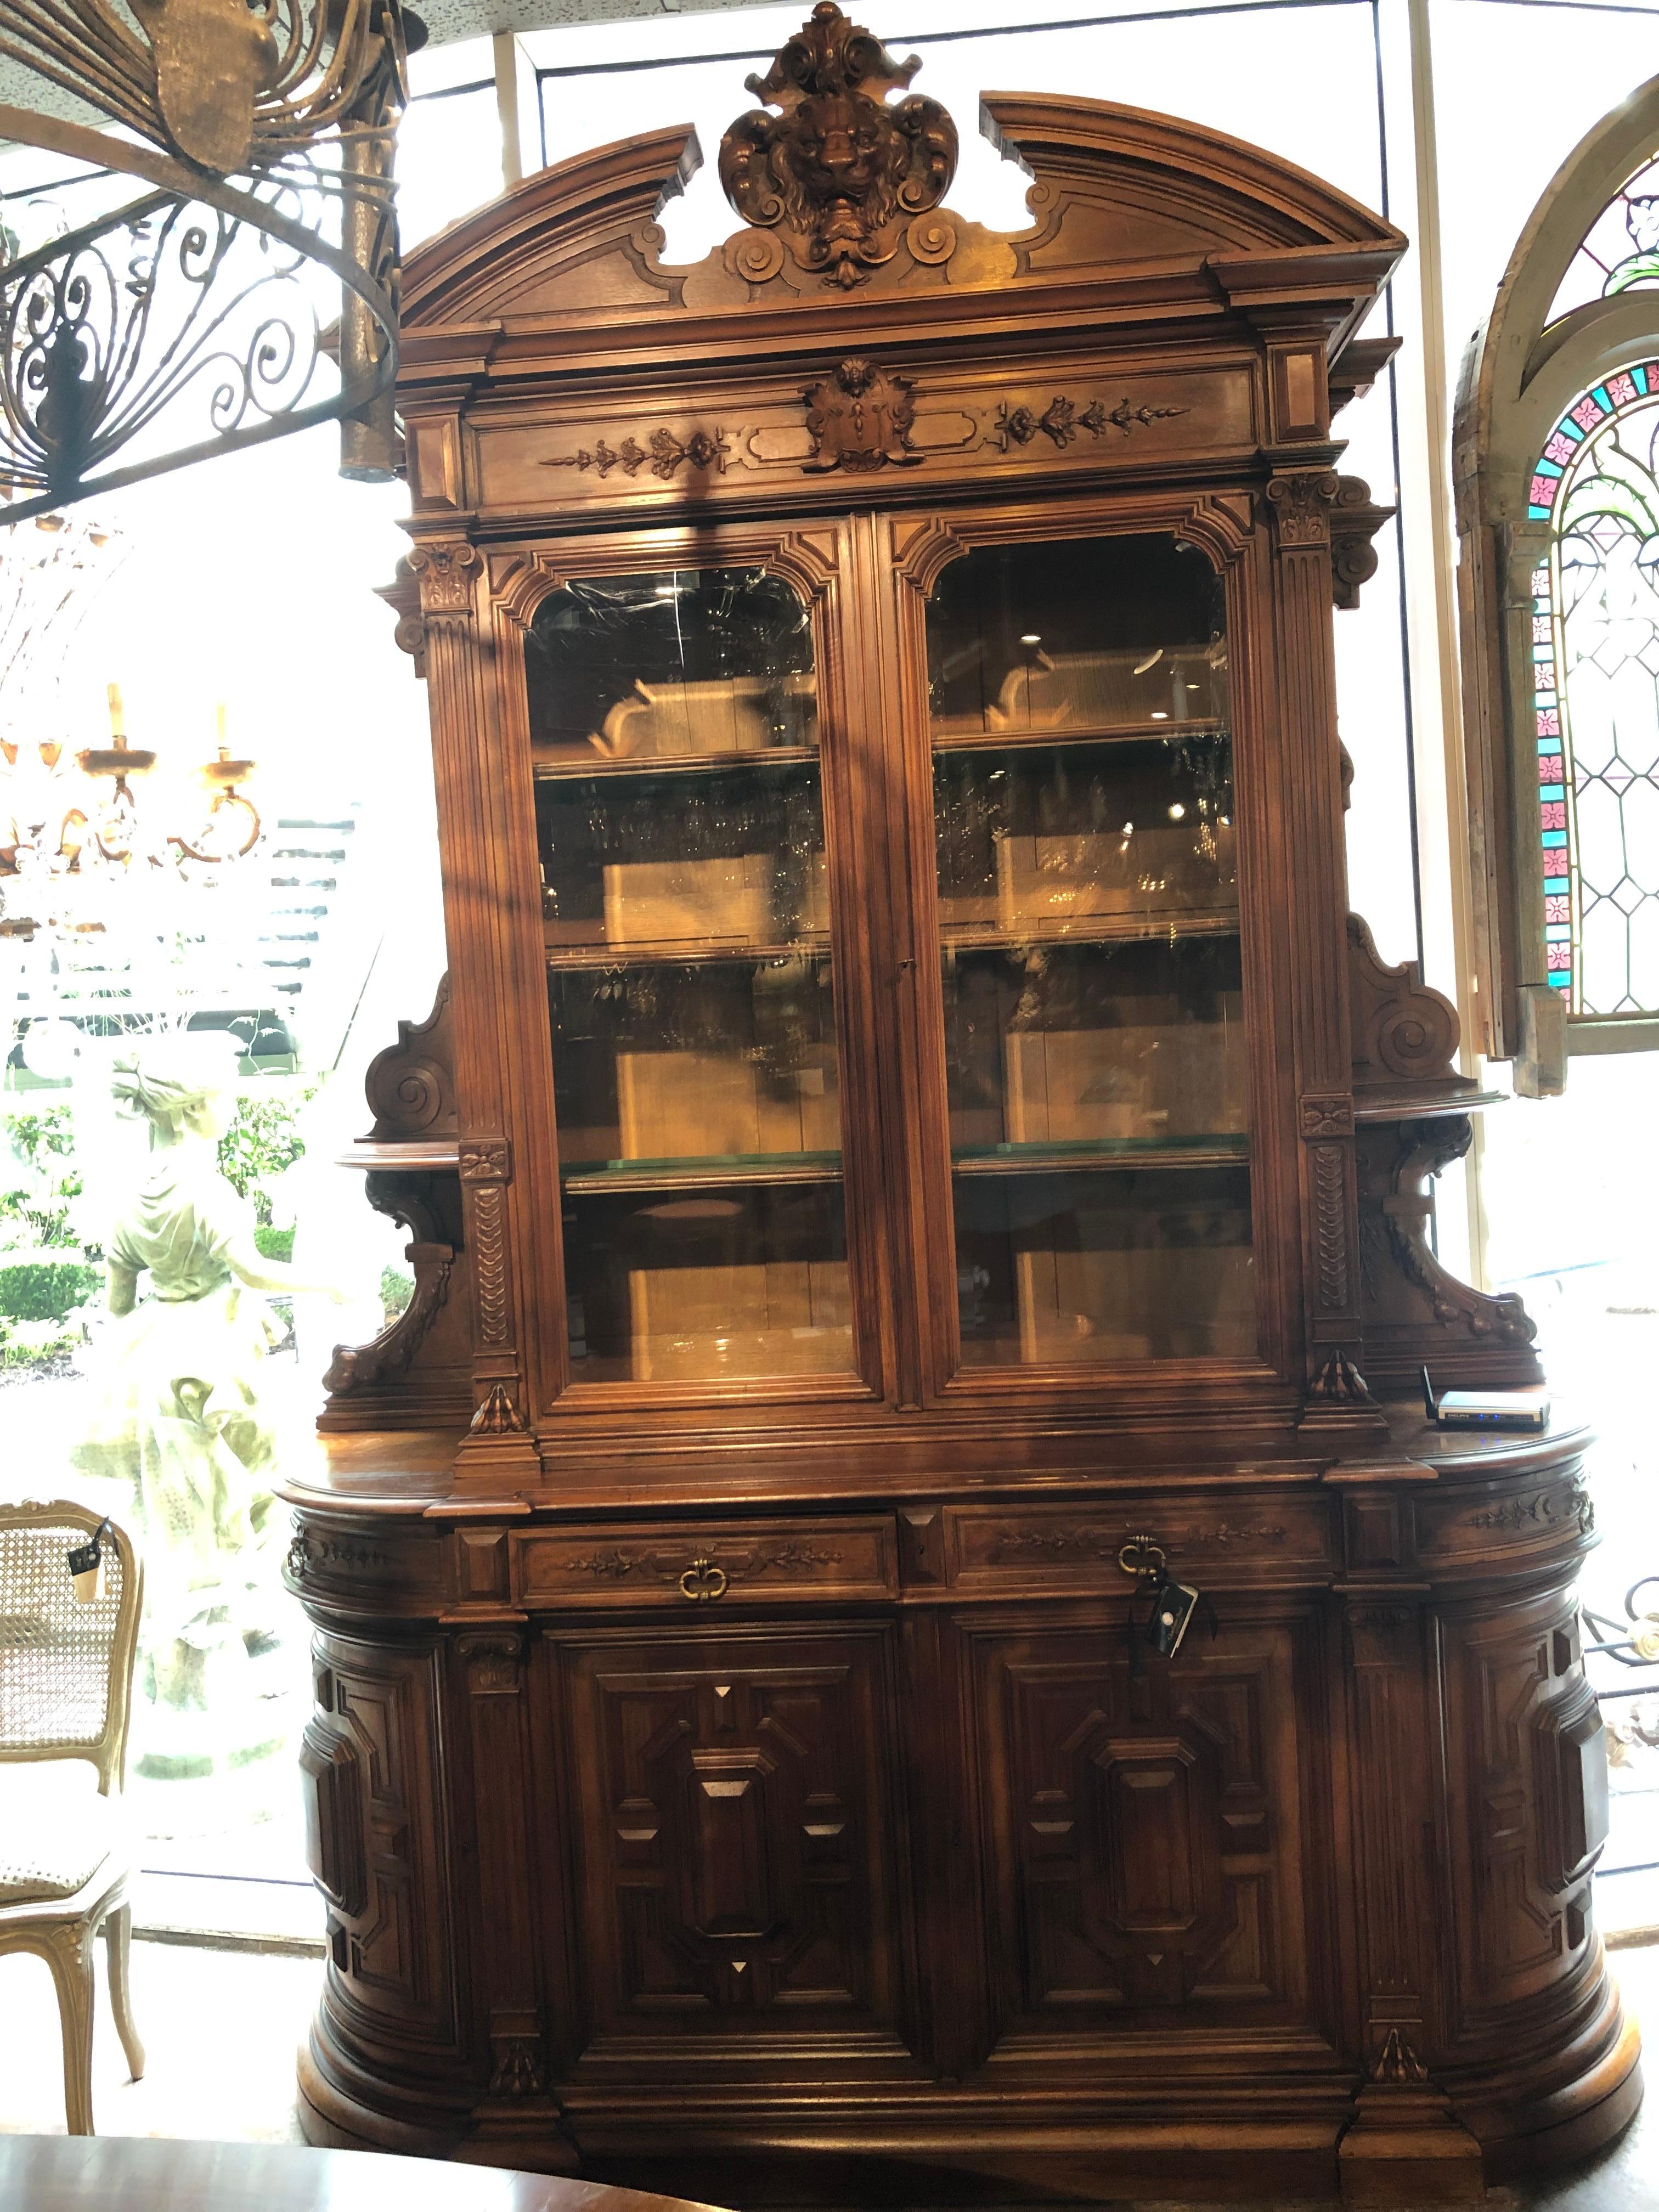 Large and exceptional French walnut
piece! Excellent as a display cabinet
or for use in a library as a book case.
The top piece has had mirror on the back 
To enhance display. The curved sides are
Appealing in the overall design.